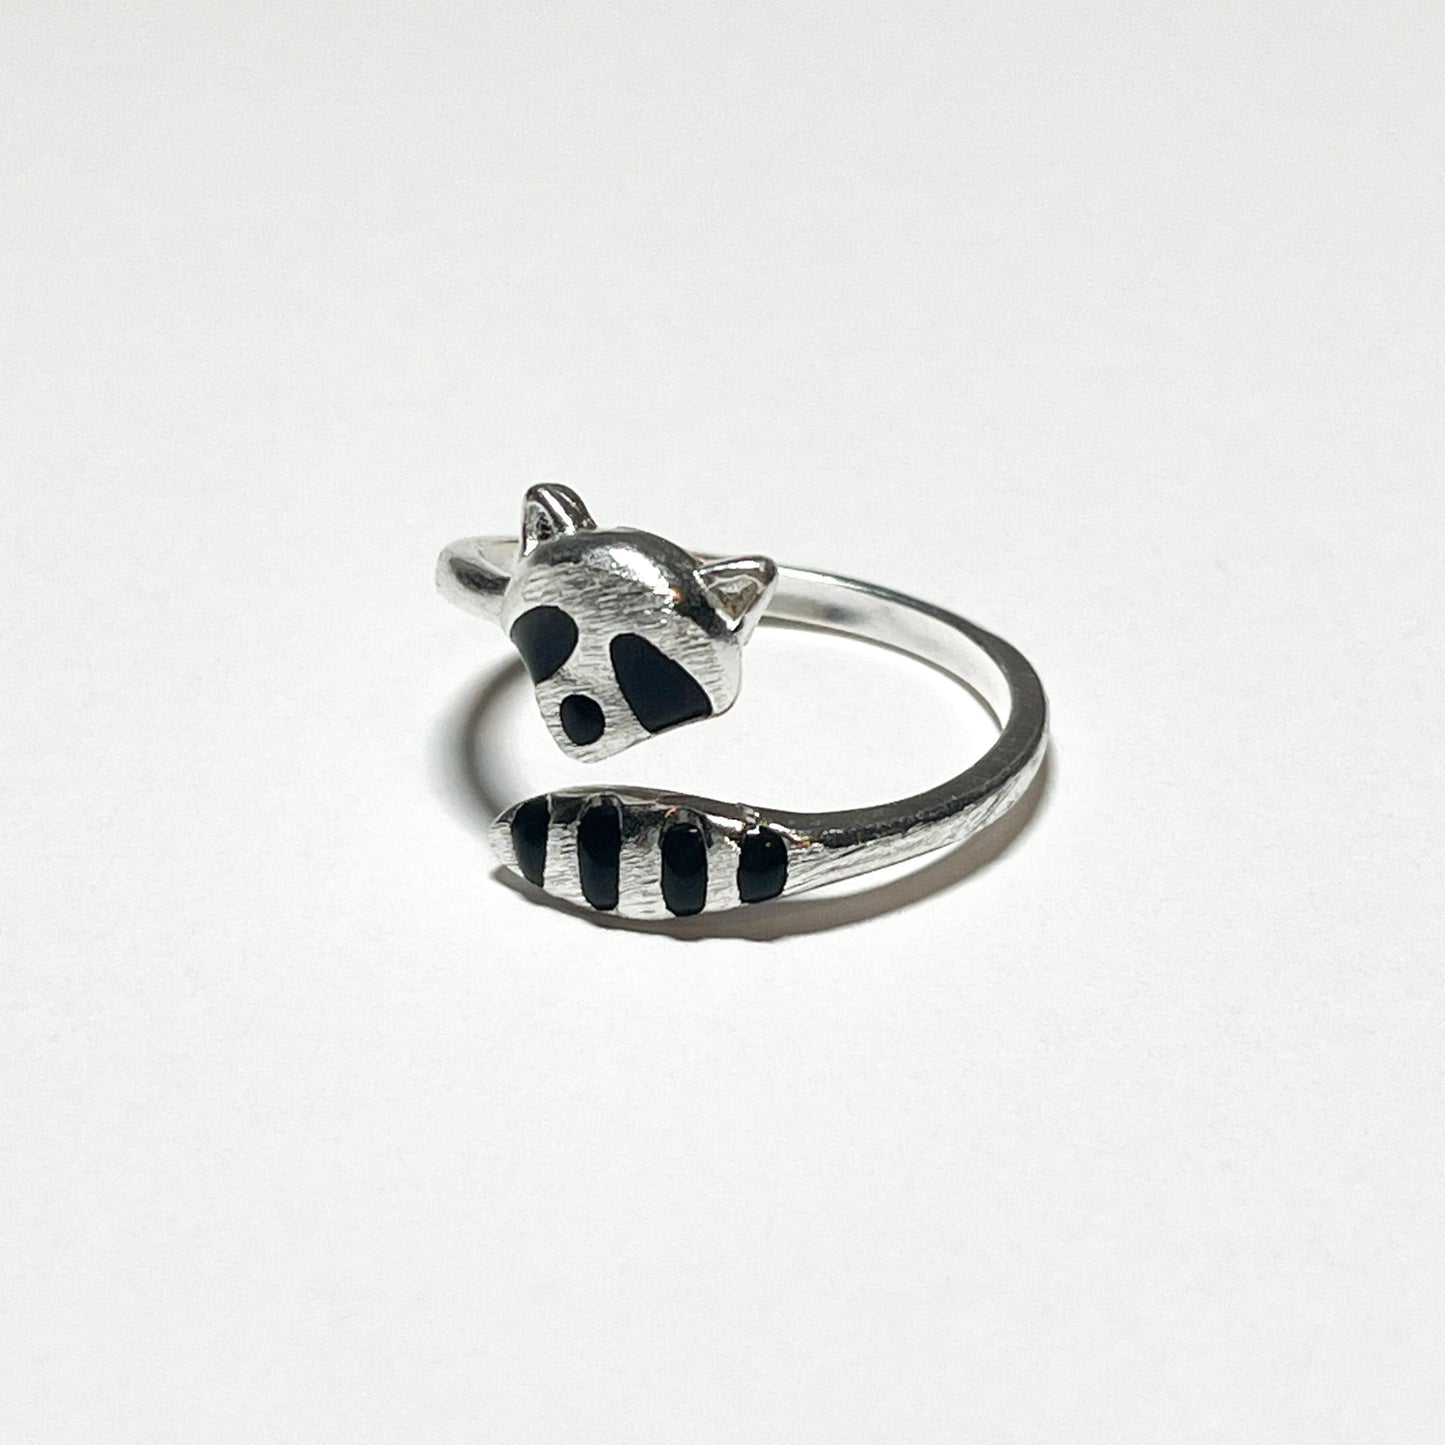 An adjustable silver ring of a raccoon